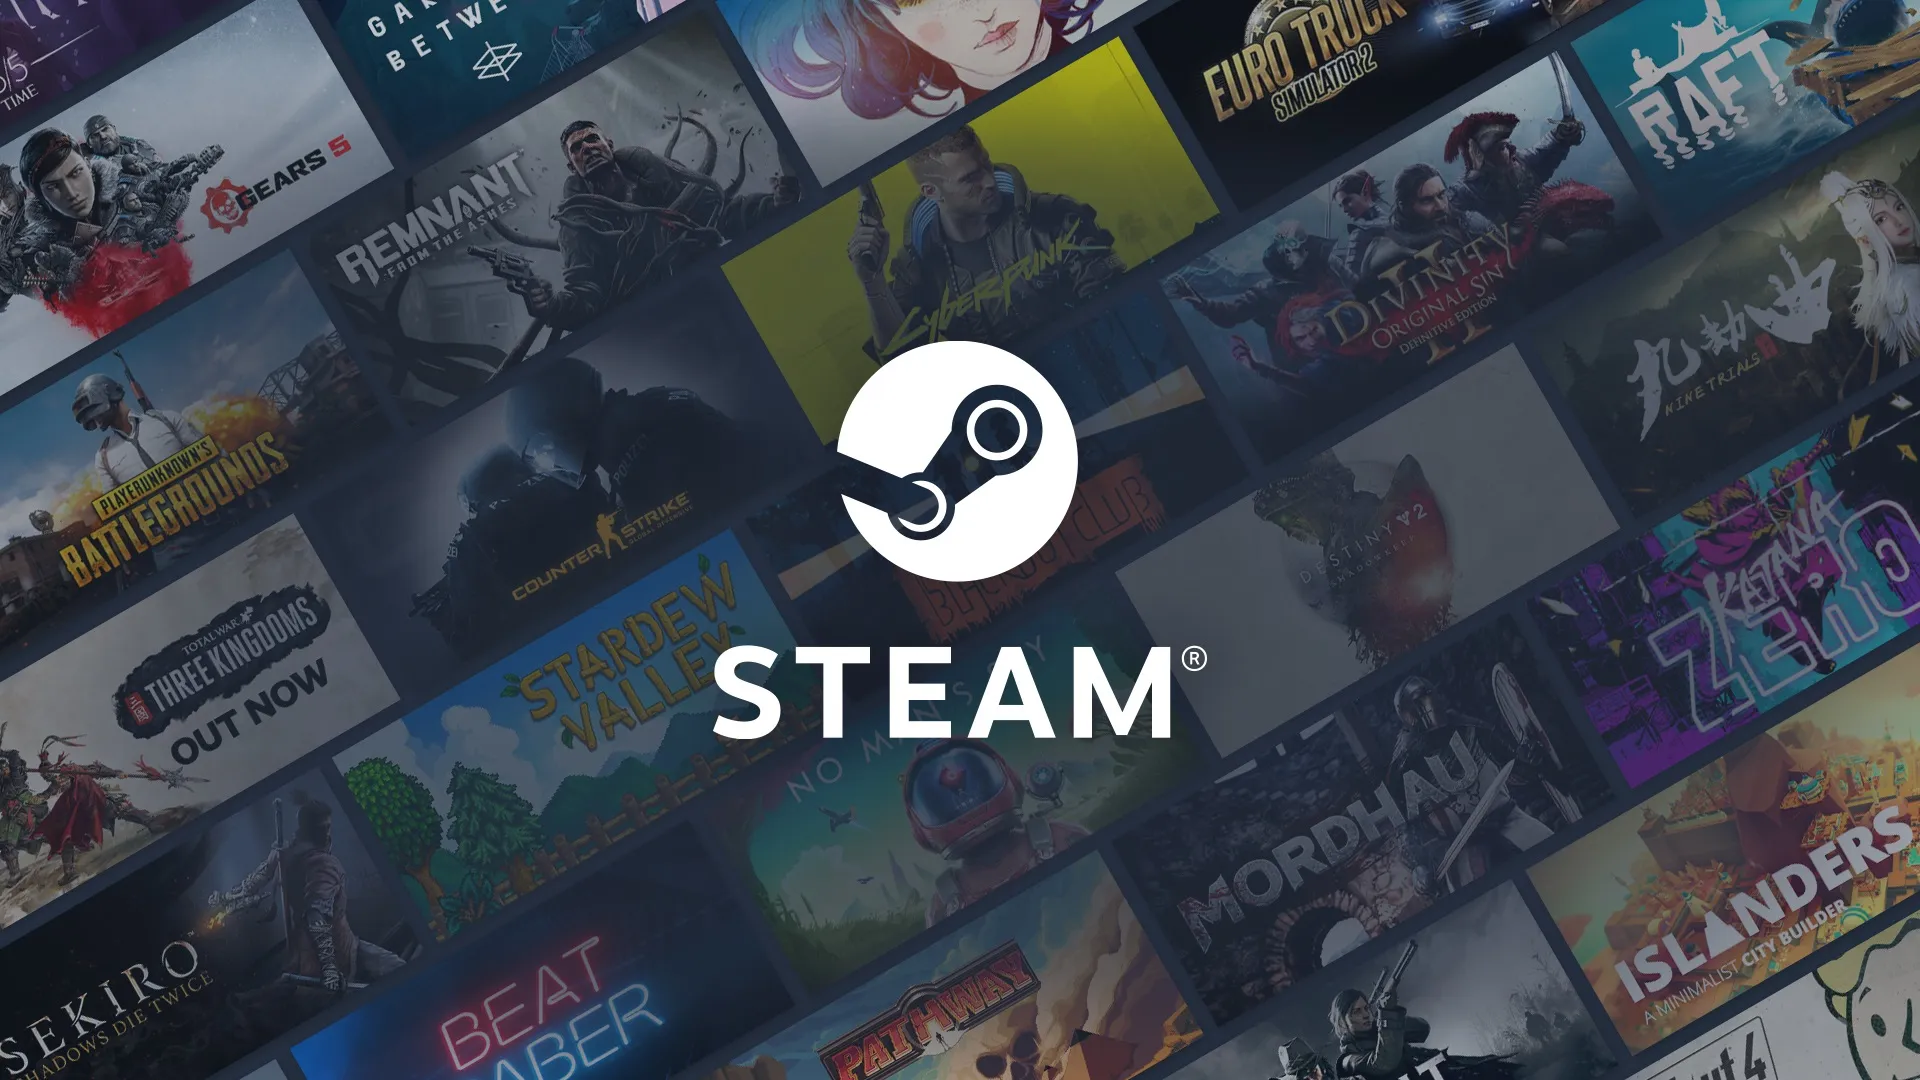 How To Download Steam Workshop Mods Without Steam